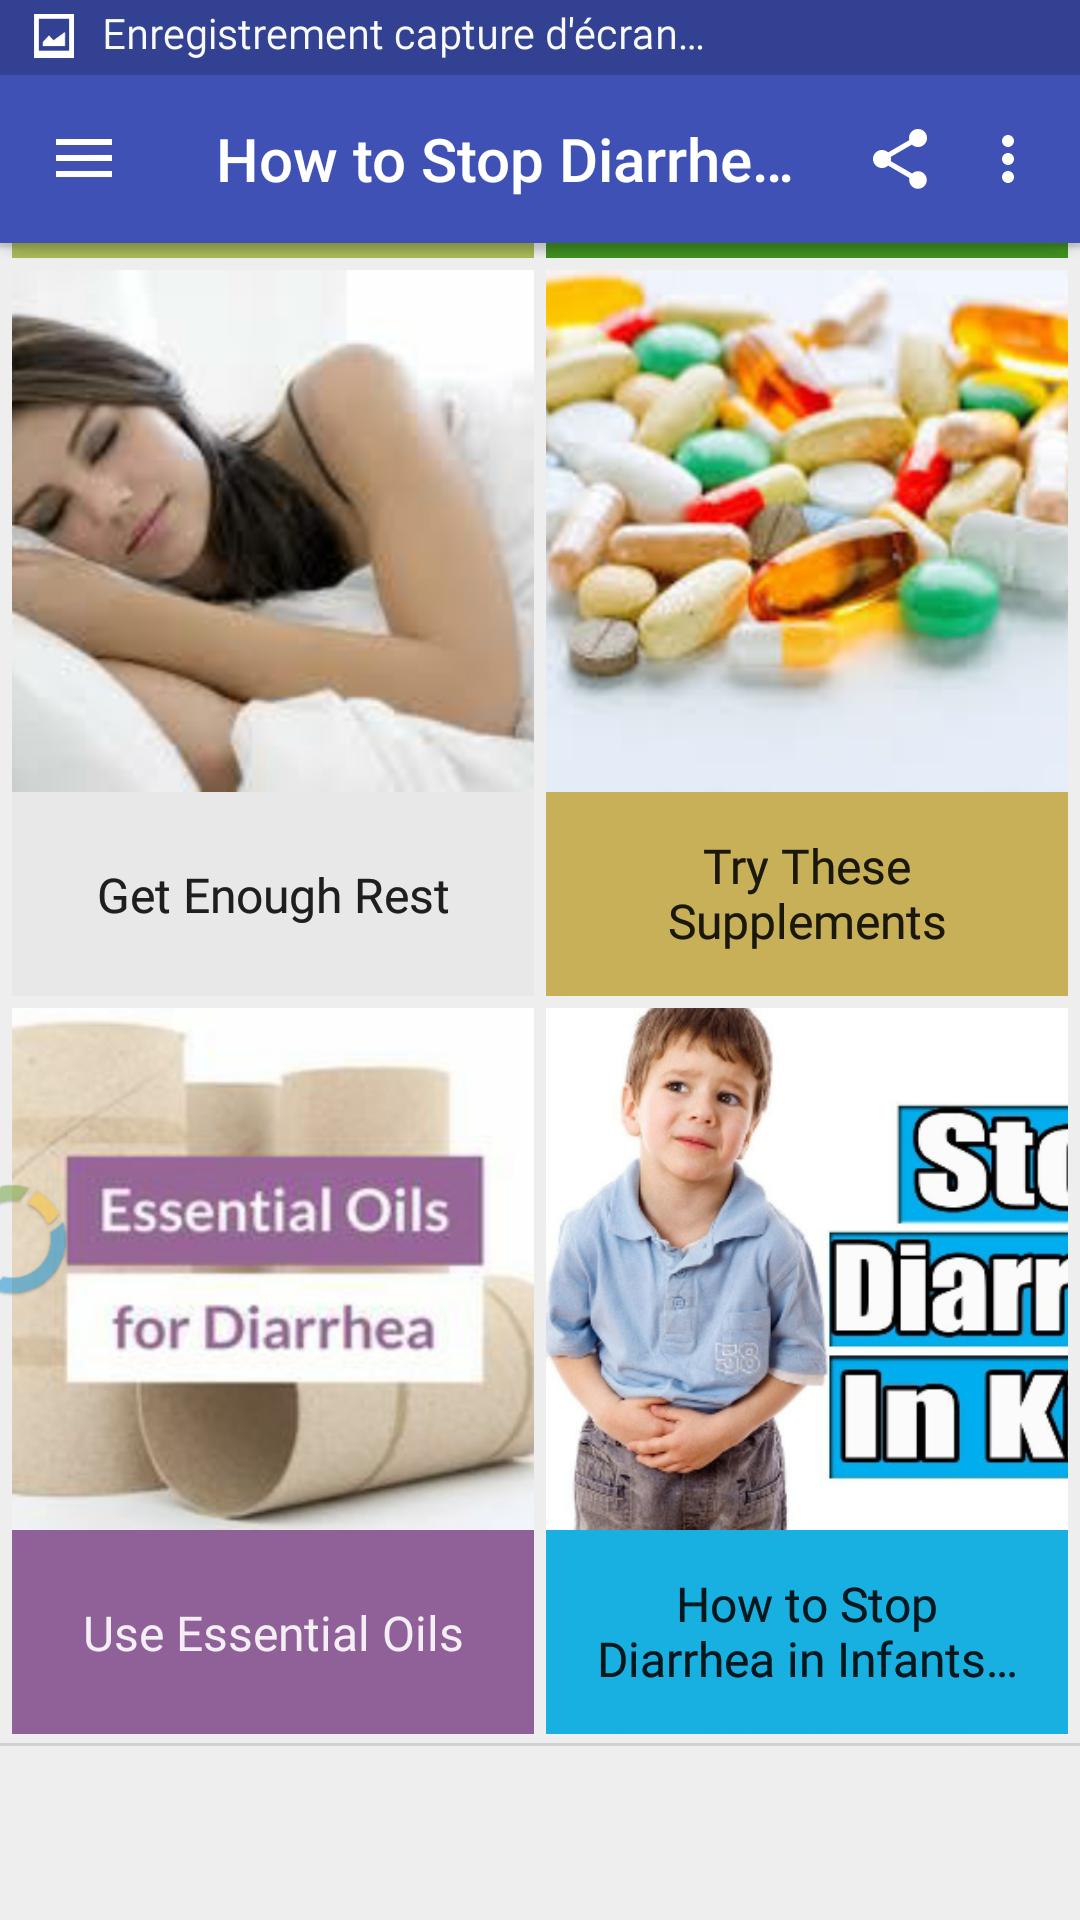 How to cure diarrhea